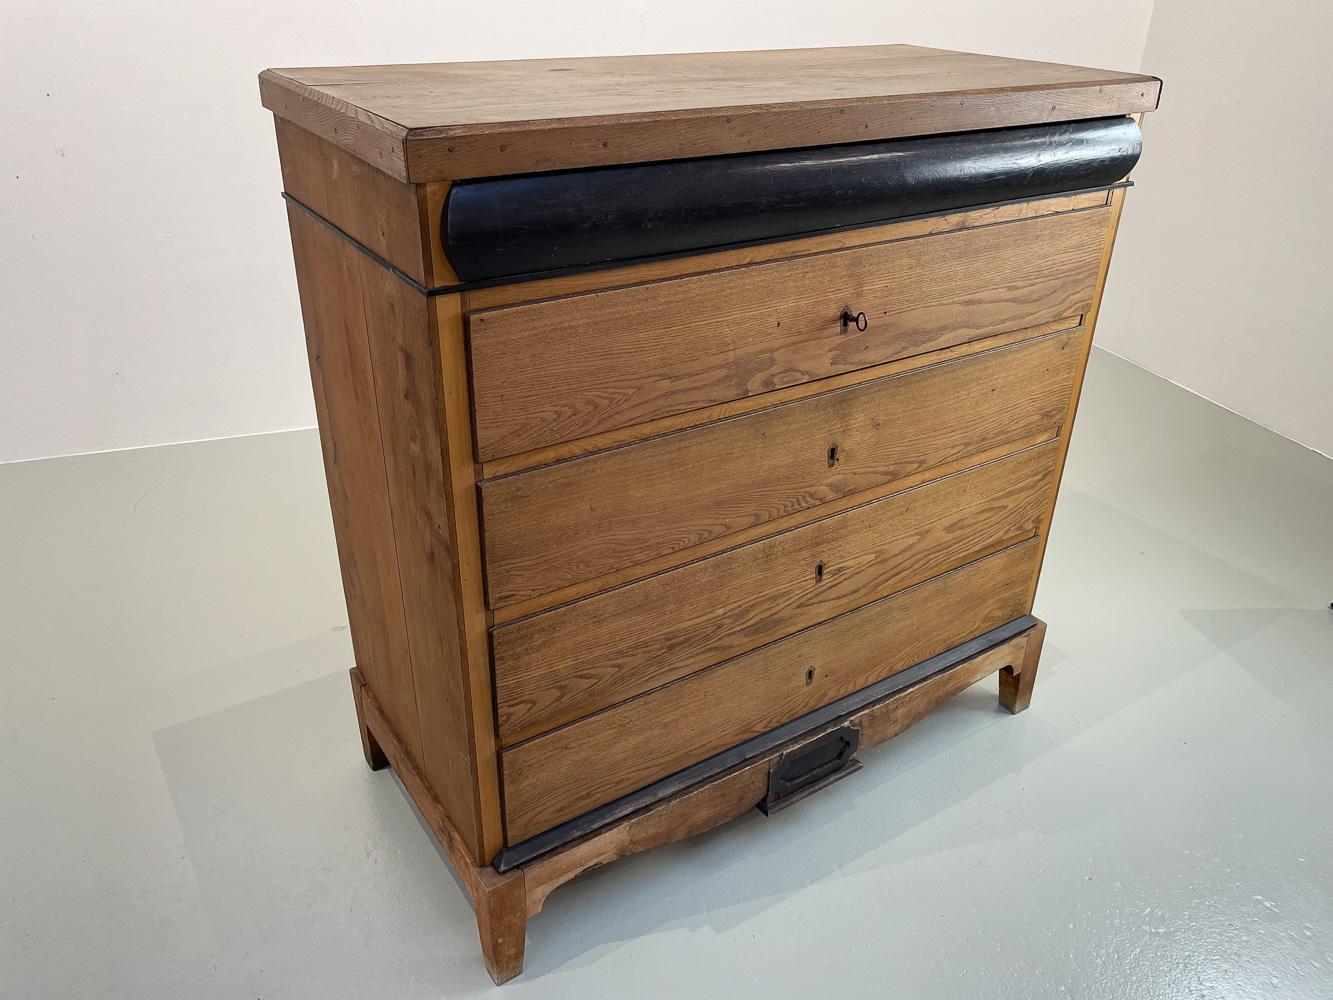 Antique Danish Oak Chest of Drawers, ca. 1800.
Amazing Empire oak dresser made by Danish master carpenter 1790-1810. Solid oak body and drawer fronts. Ebonized trim and concealed top drawer. Four drawers with original locks and key. Top drawer has a